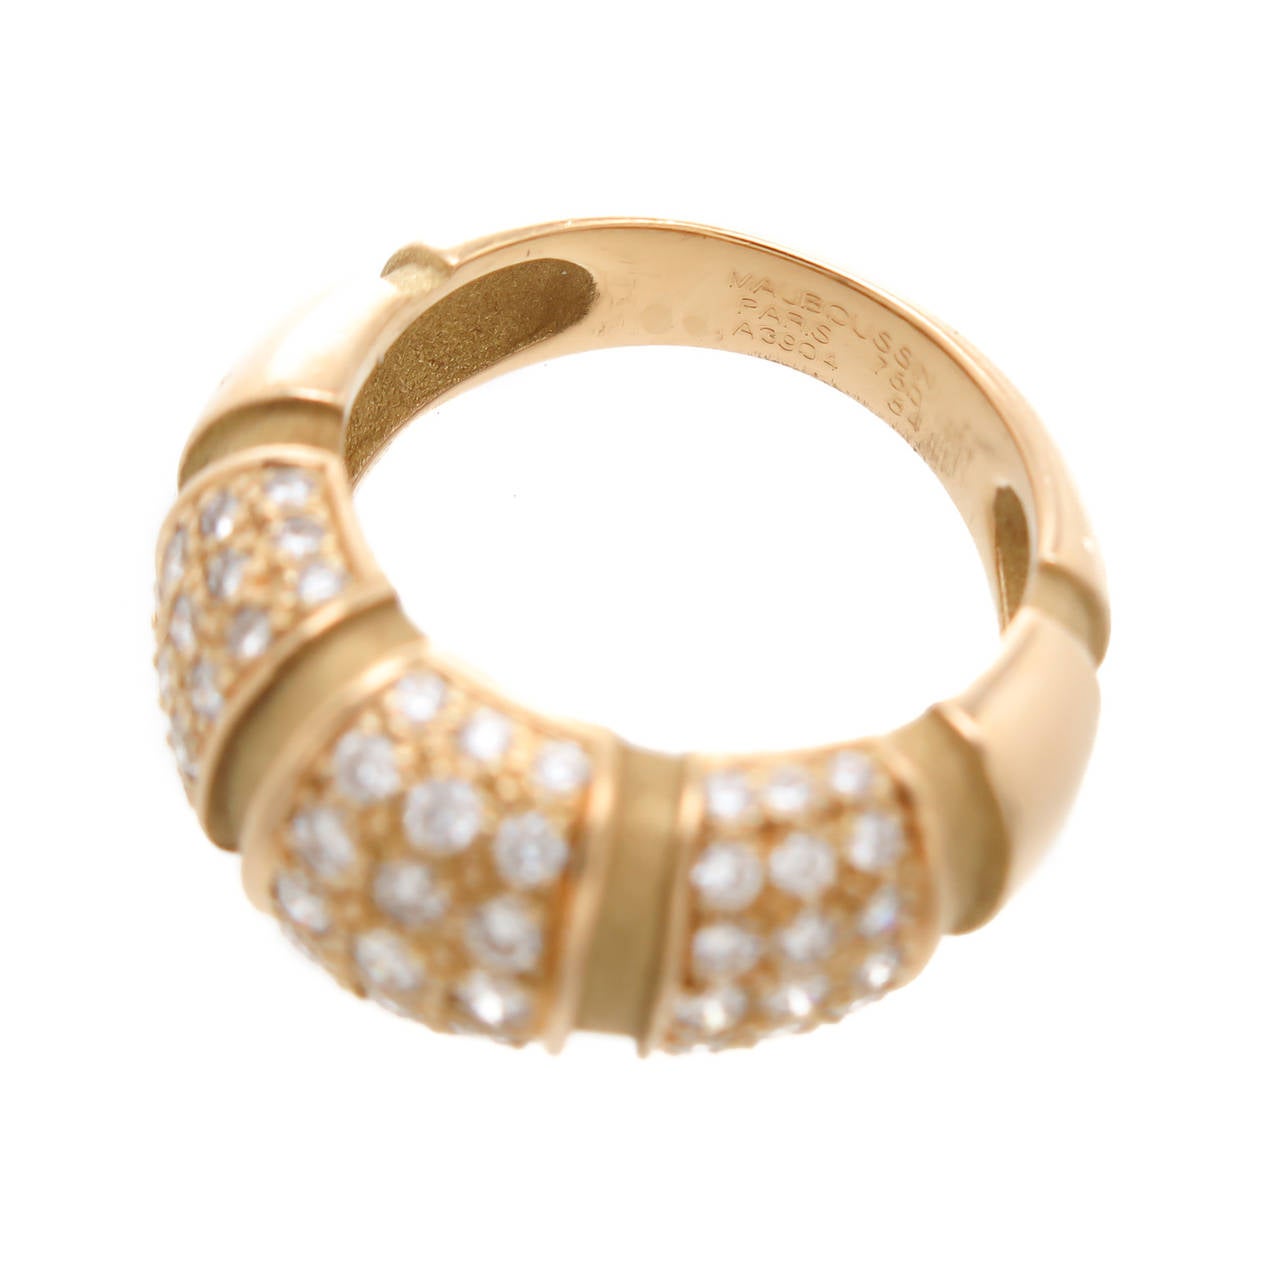 Circa 2005 Moubaussin Paris 18K Yellow Gold and Diamond Bombay Ring. Having a Ribbed Dome Design with 3 Sections set with Fine White Round Brilliant cut Diamonds totaling 2 Carats. Top measures just under 1 inch in length and 3/8 Inch wide. Signed